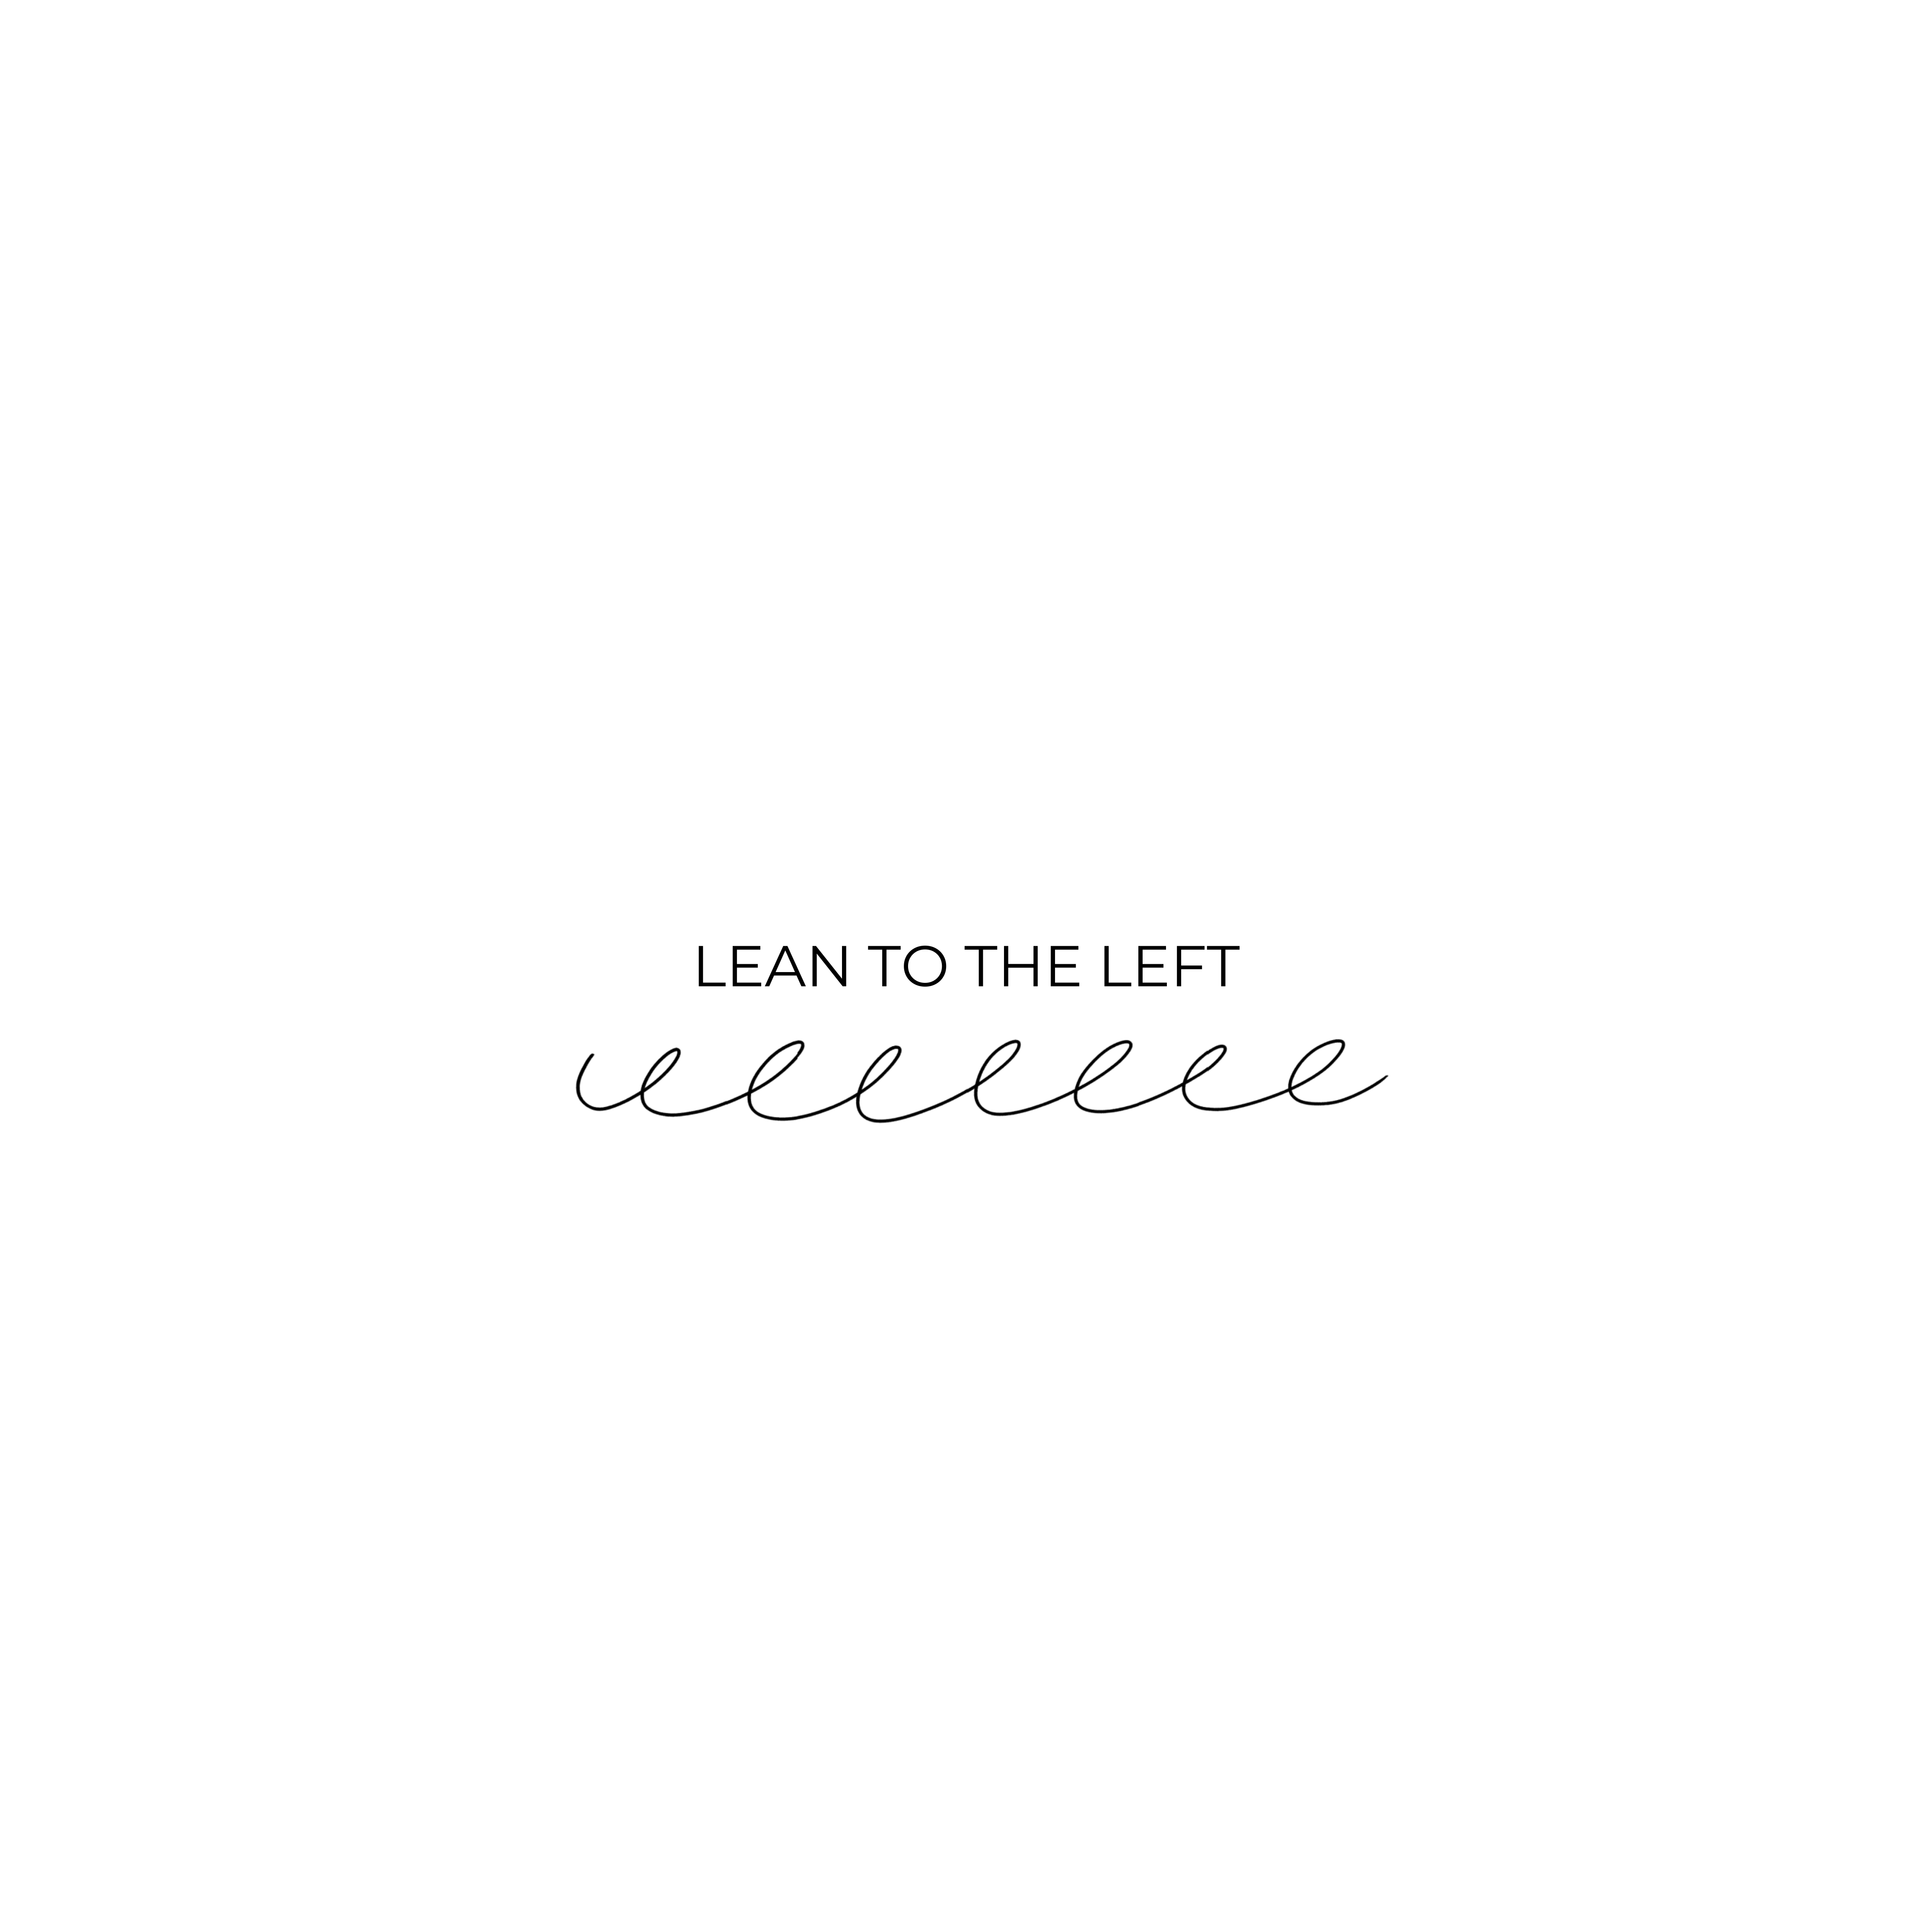 LEAN TO THE LEFT